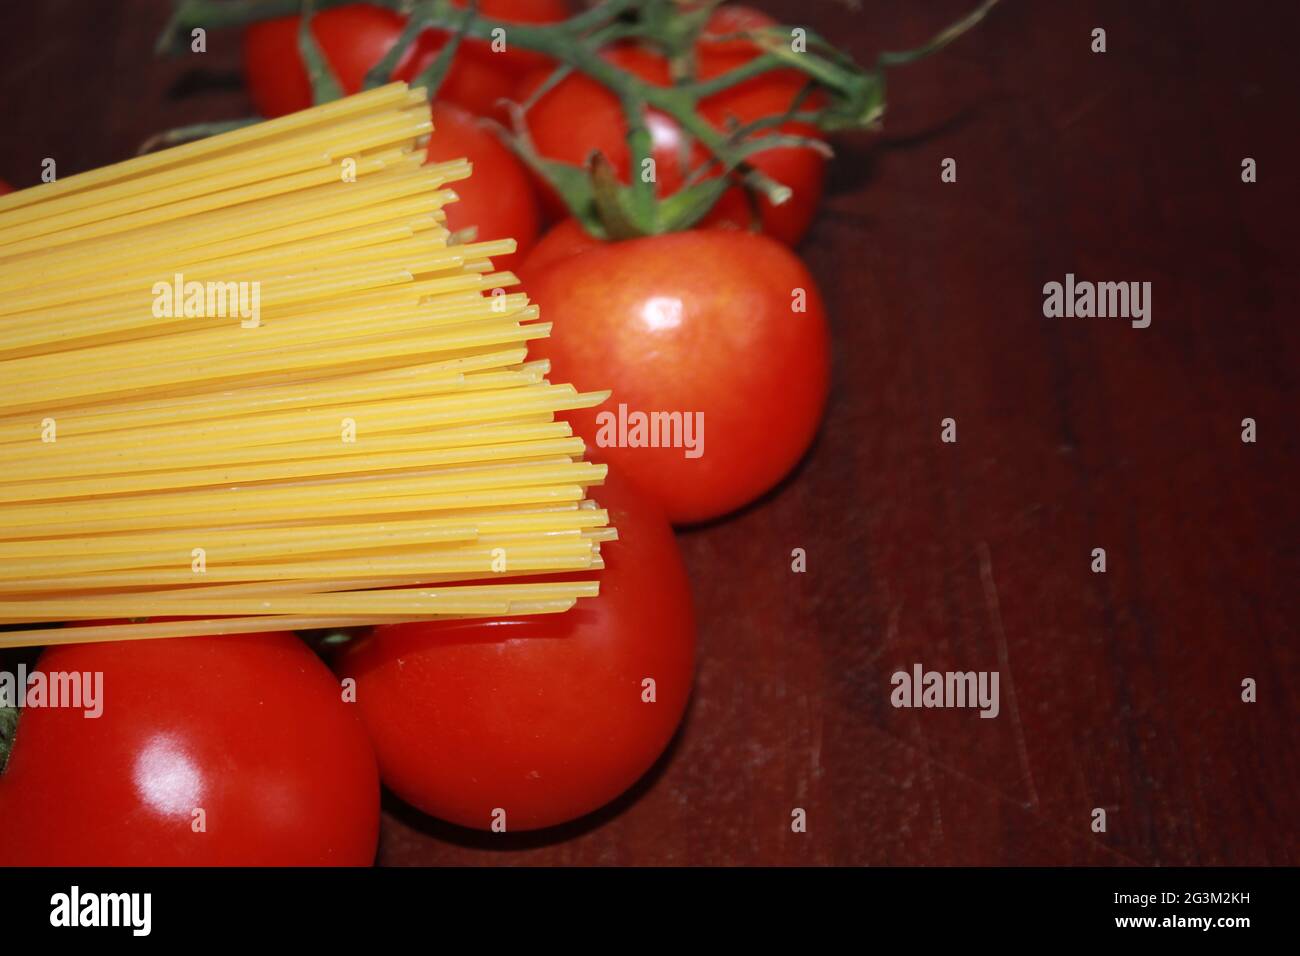 Uncooked spaghetti and tomato closeup photography on a wood background. Stock Photo